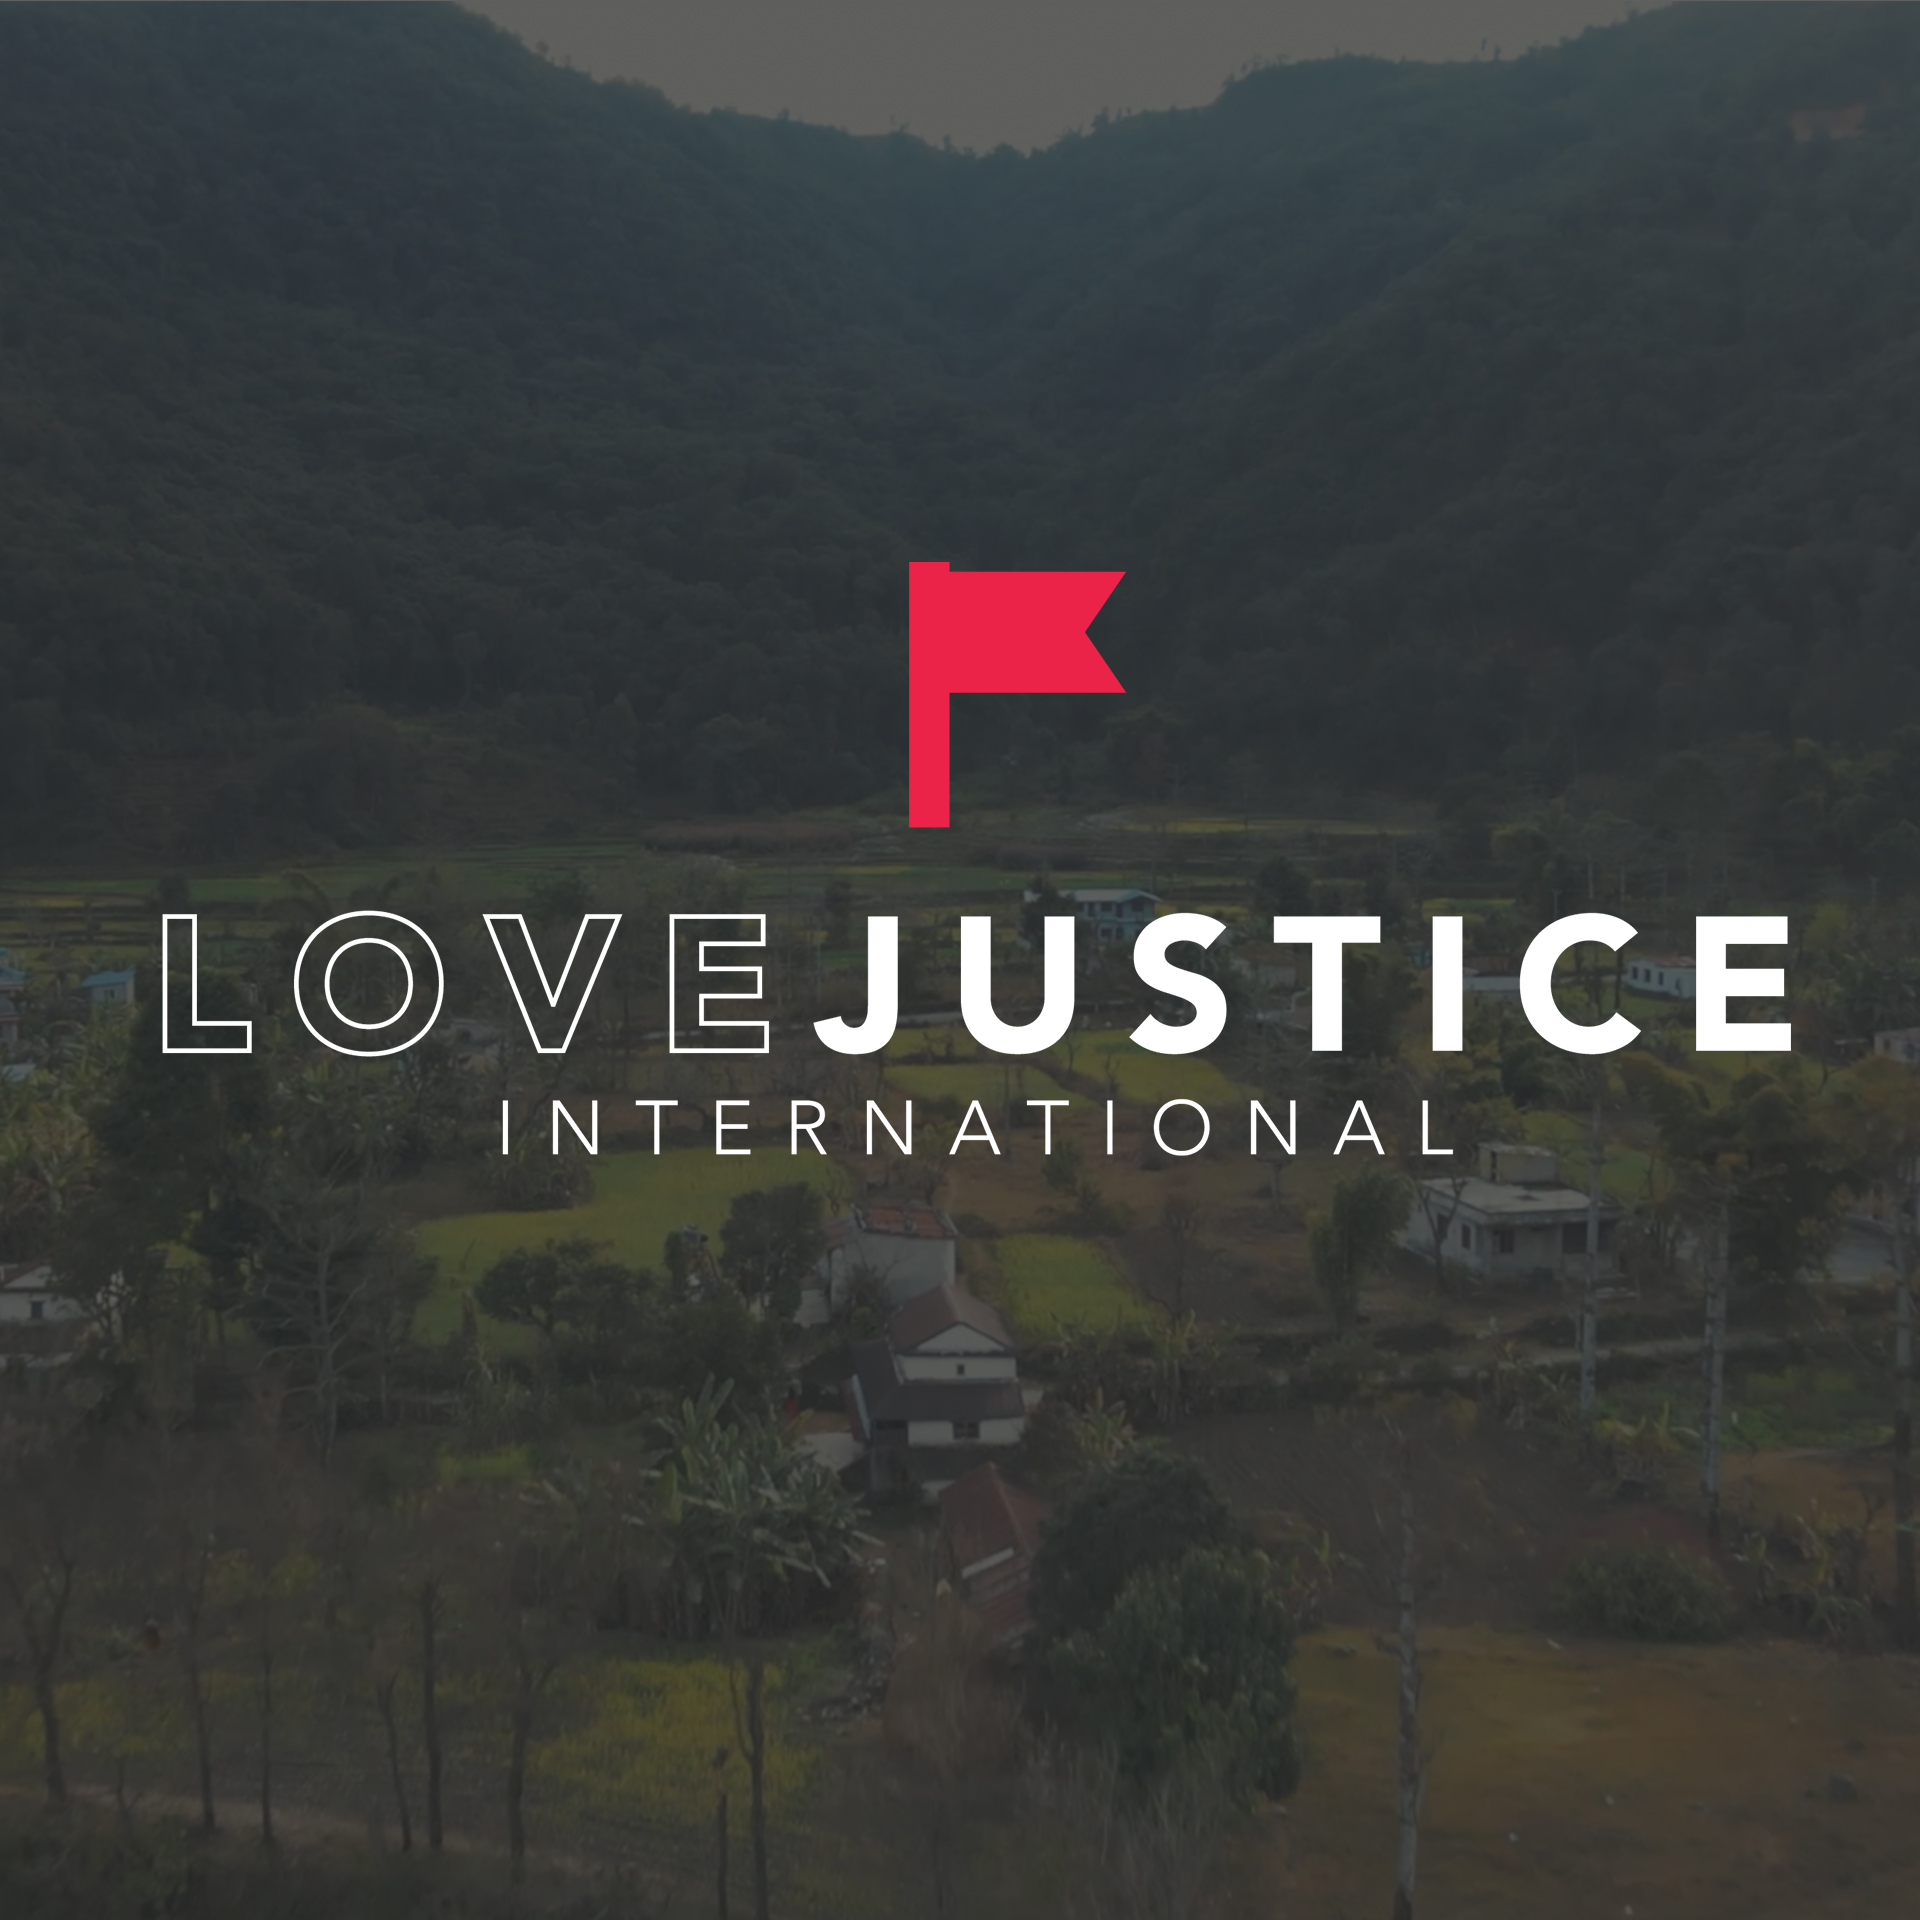 Introducing "the LOVE JUSTICE podcast" (episode zero) with co-hosts Hannah Munn and Jason Dukes | LoveJustice.NGO